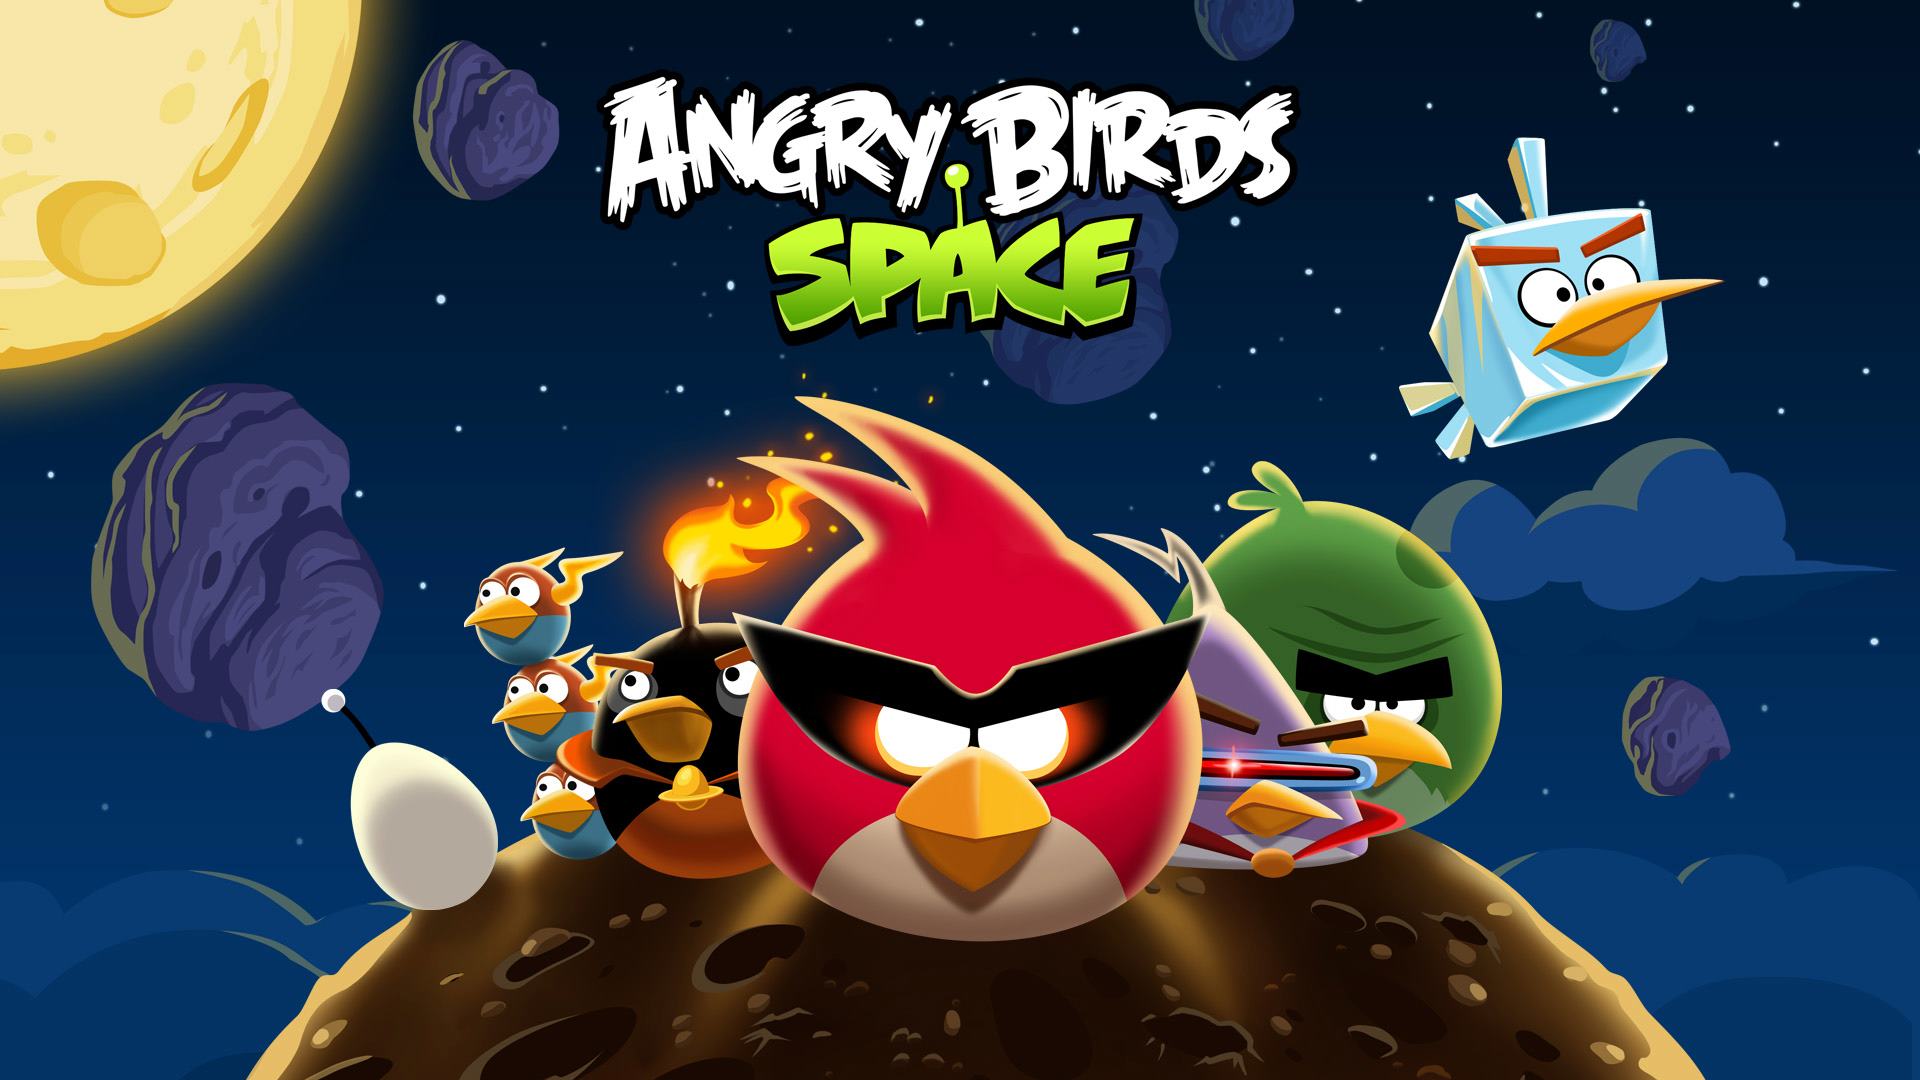 Wallpapers angrybirds